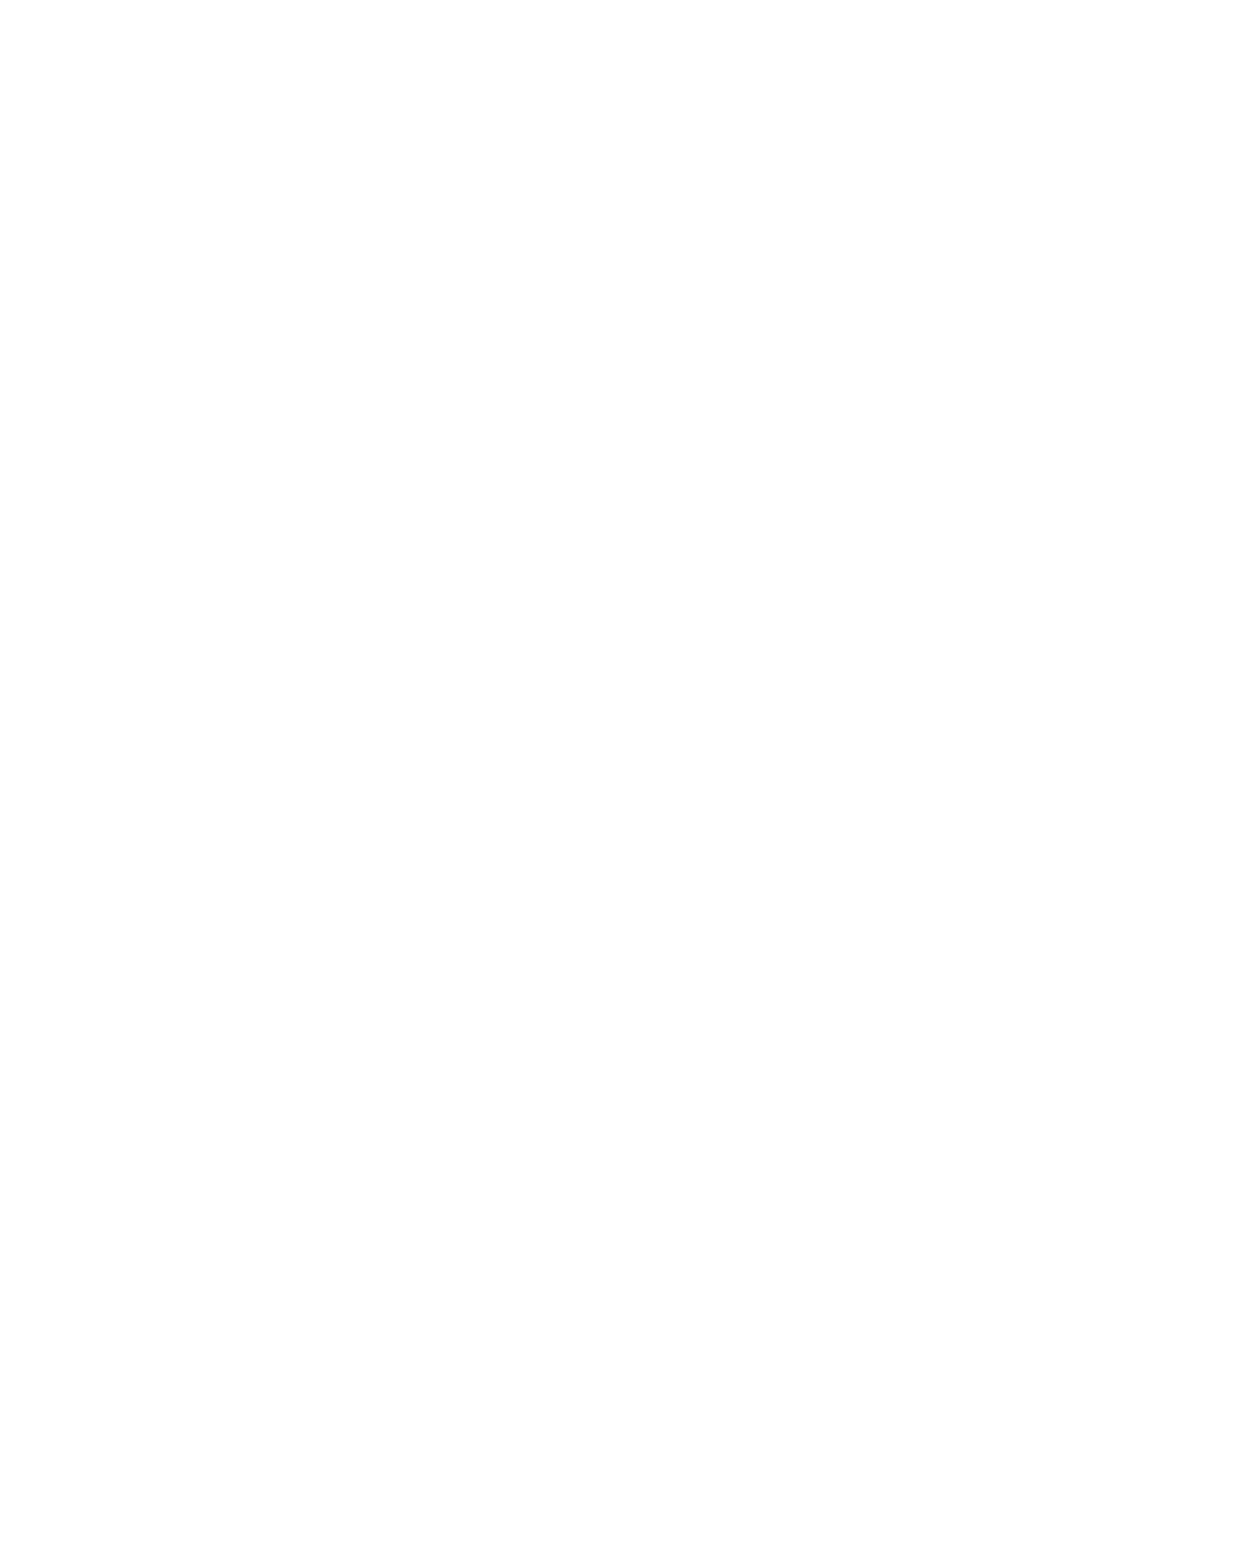 Luckin Coffee logo for dark backgrounds (transparent PNG)